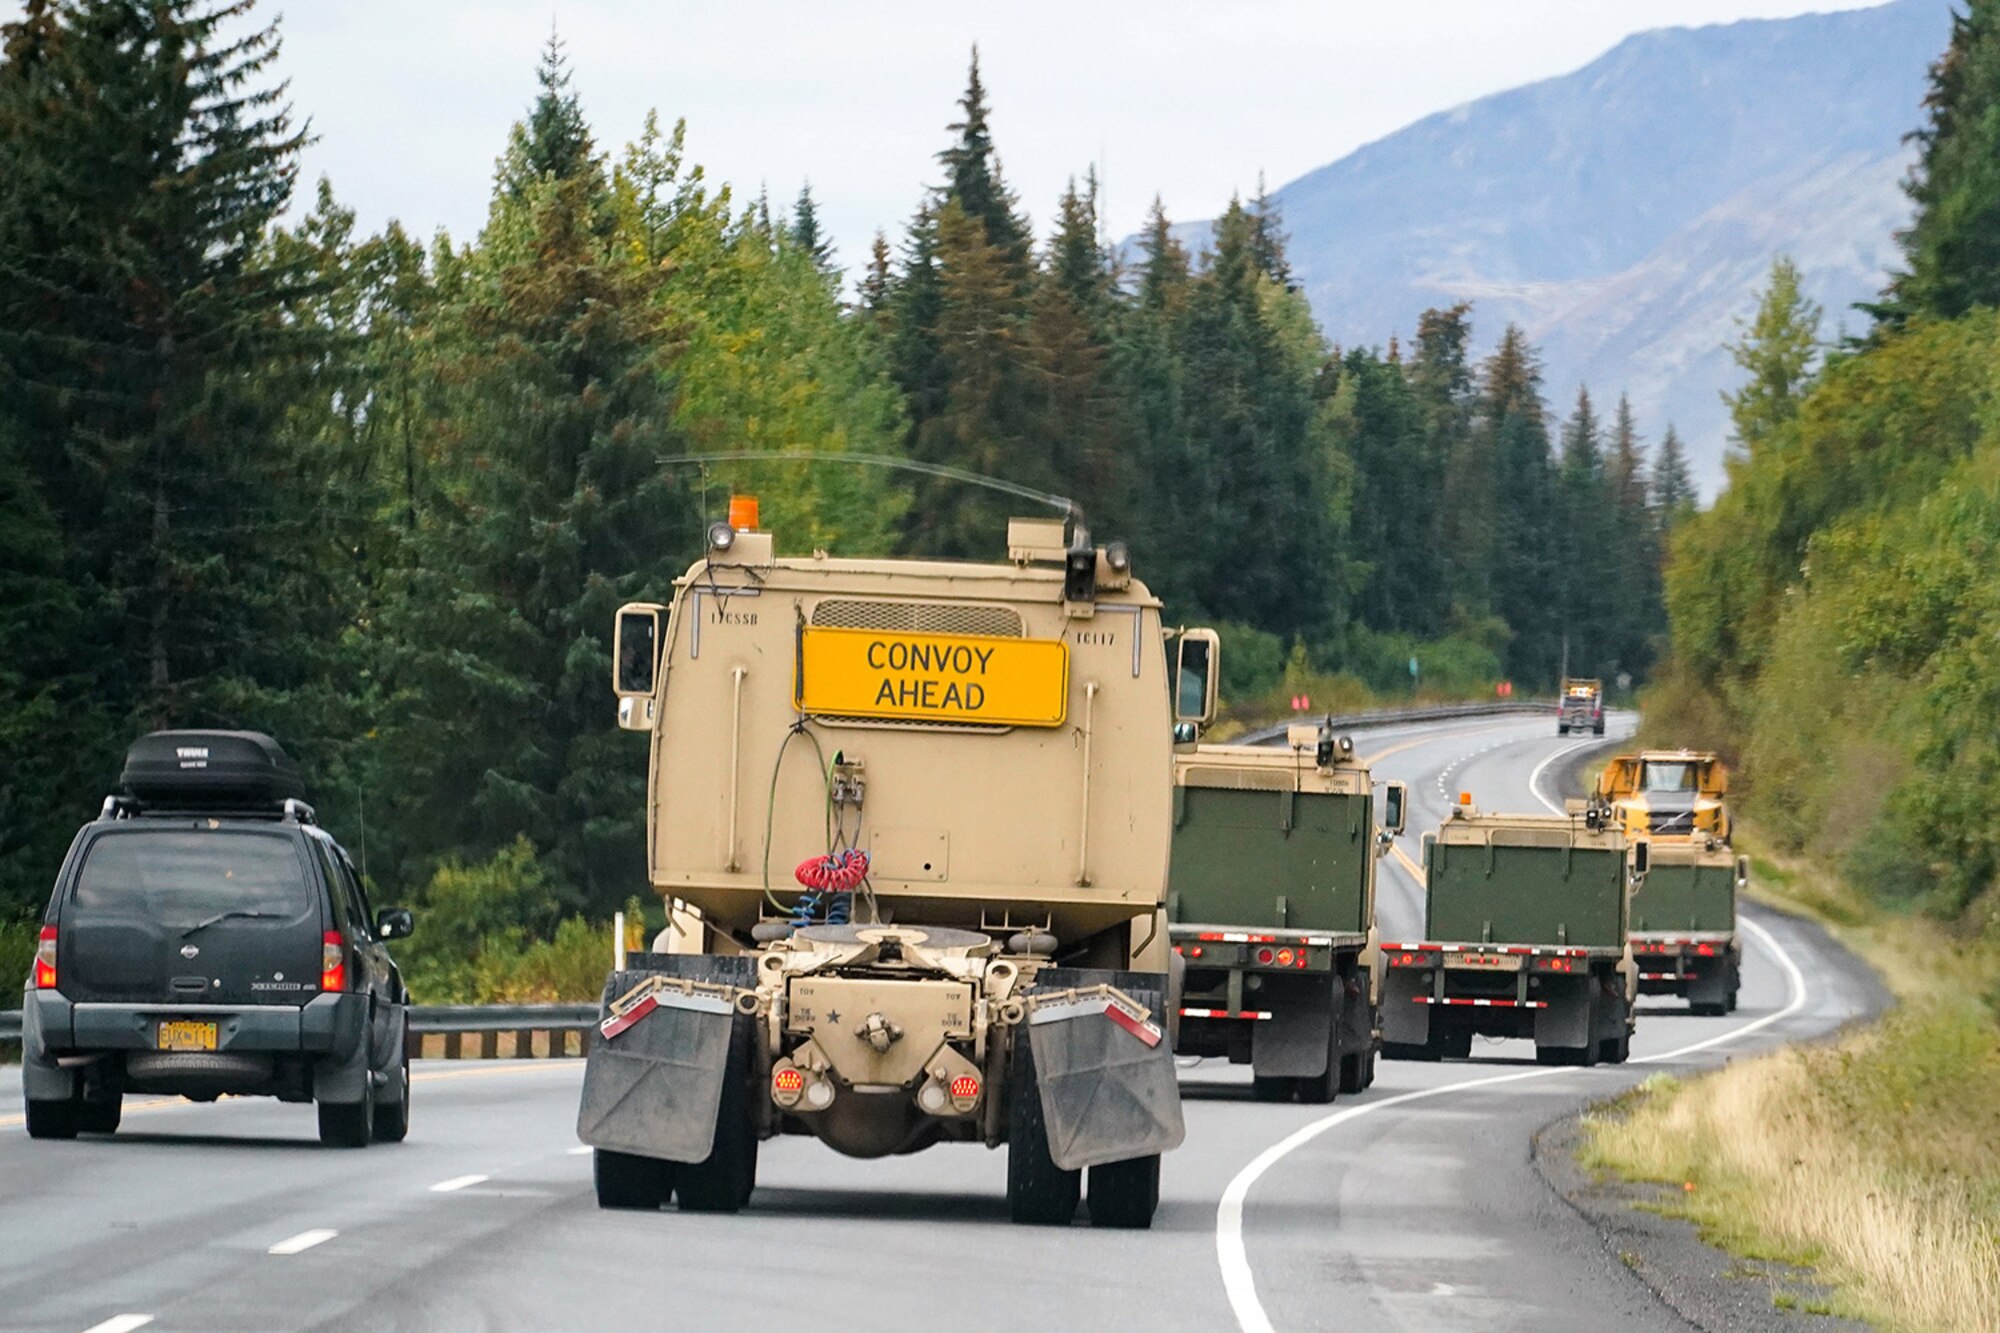 Soldiers assigned to the 109th Transportation Company, 17th Combat Support Sustainment Battalion, U.S. Army Alaska, convoy through the Kenai Penninsula to load U.S. Marine Corps bulk fuel supplies and equipment from the U.S.S. Comstock (LSD-45), a Whidbey Island-class dock landing ship, at the port of Seward, Alaska, Sept. 19, 2019, for transport to Joint Base Elmendorf-Richardson, Alaska. The U.S. Navy is conducting an Arctic Expeditionary Capabilities Exercise to test its logistical effectiveness and joint-service interoperability while responding to conflict or disaster in an austere environment with no organic assets.